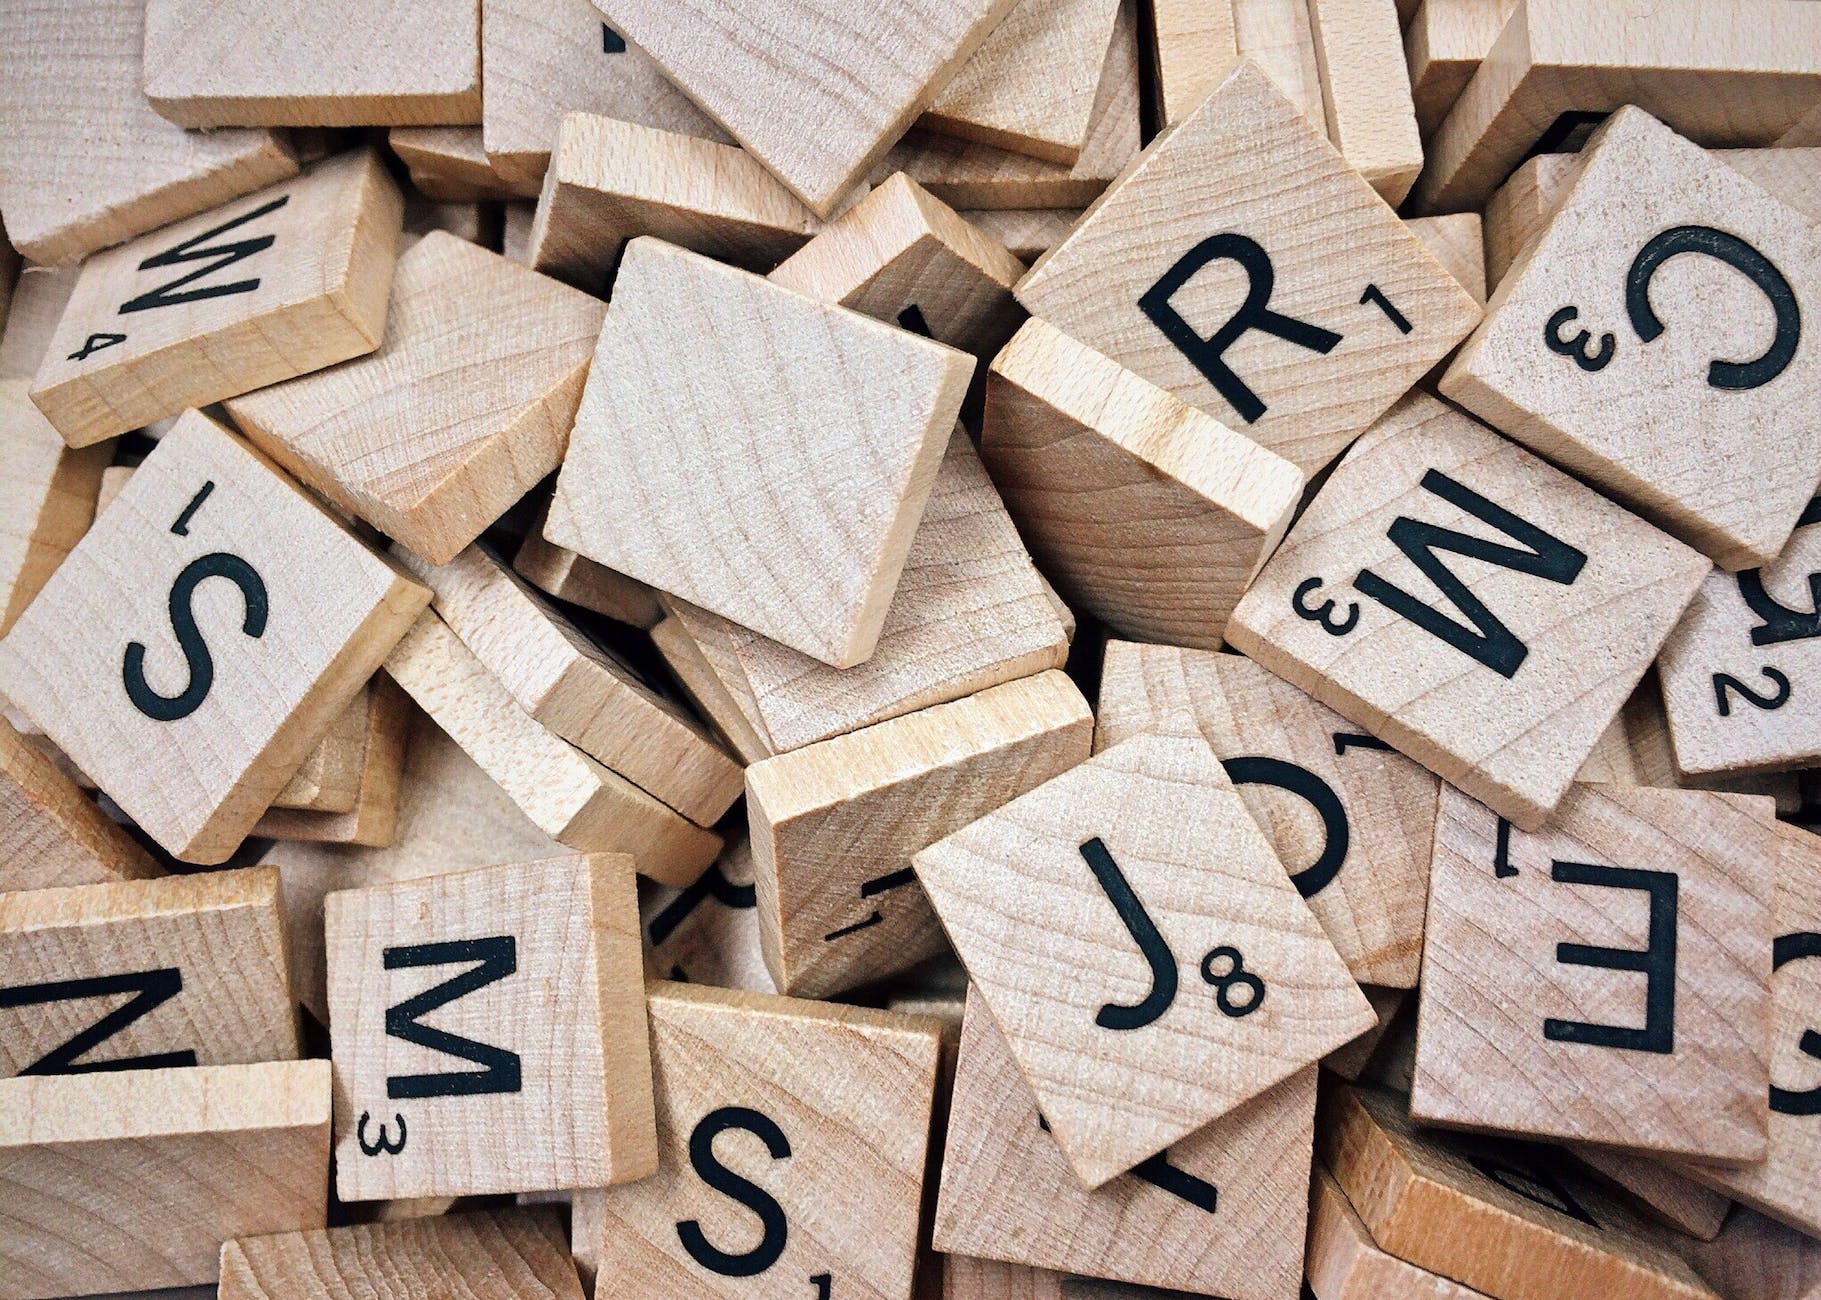 Scrabble tiles that show what my brain feels like after writing all day